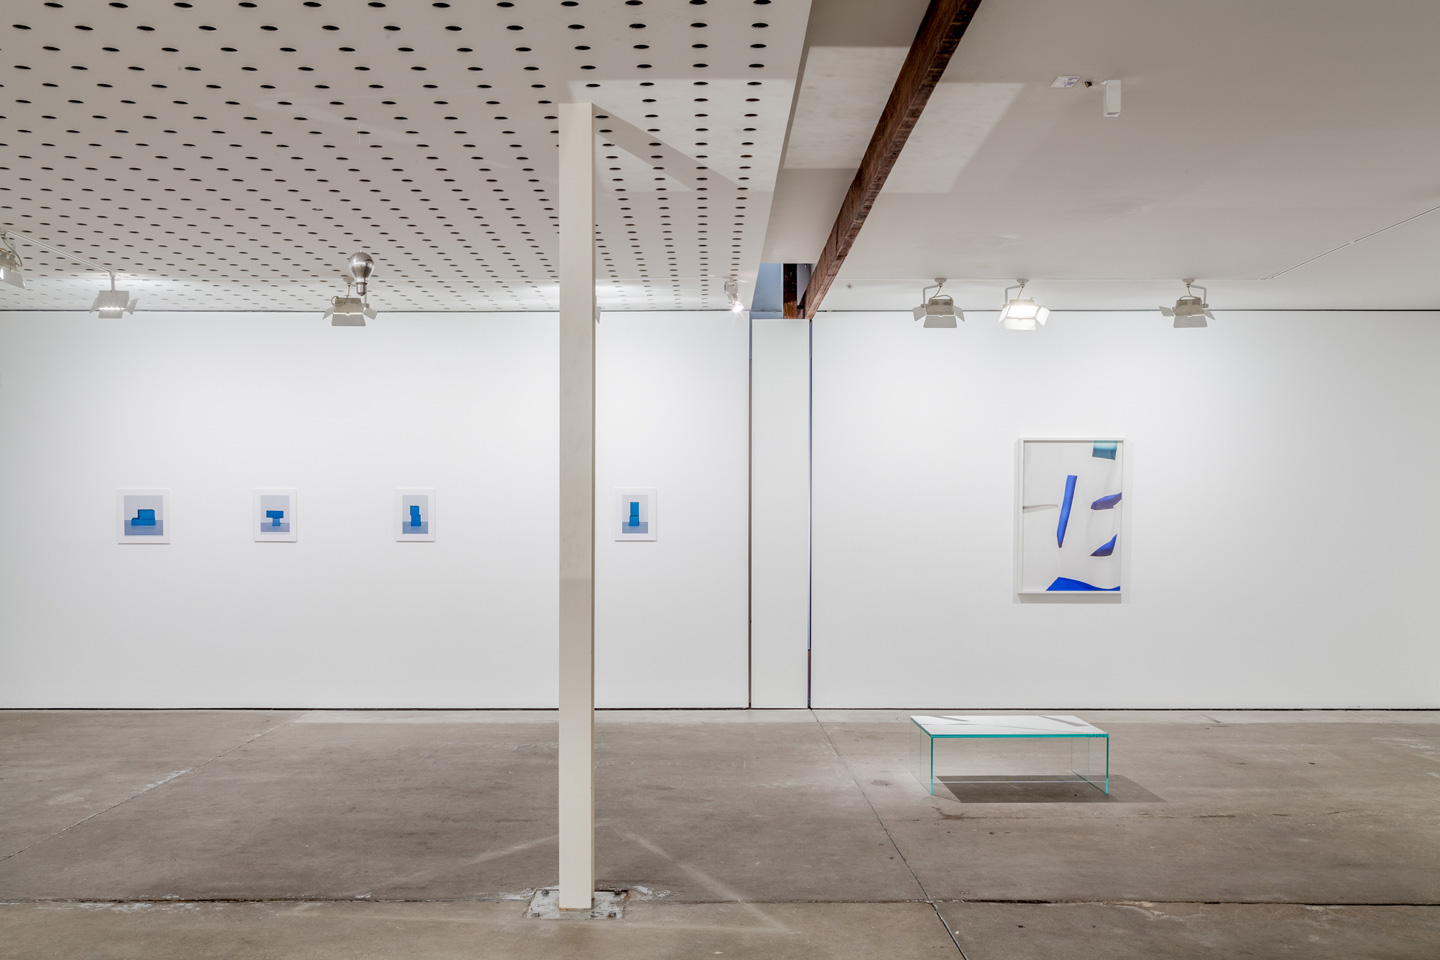 <p>Georgia Hutchison and Arini Byng. Installation view, Lit from the Top: Sculpture through Photography, Centre for Contemporary Photography. Photography: Christo Crocker.</p>